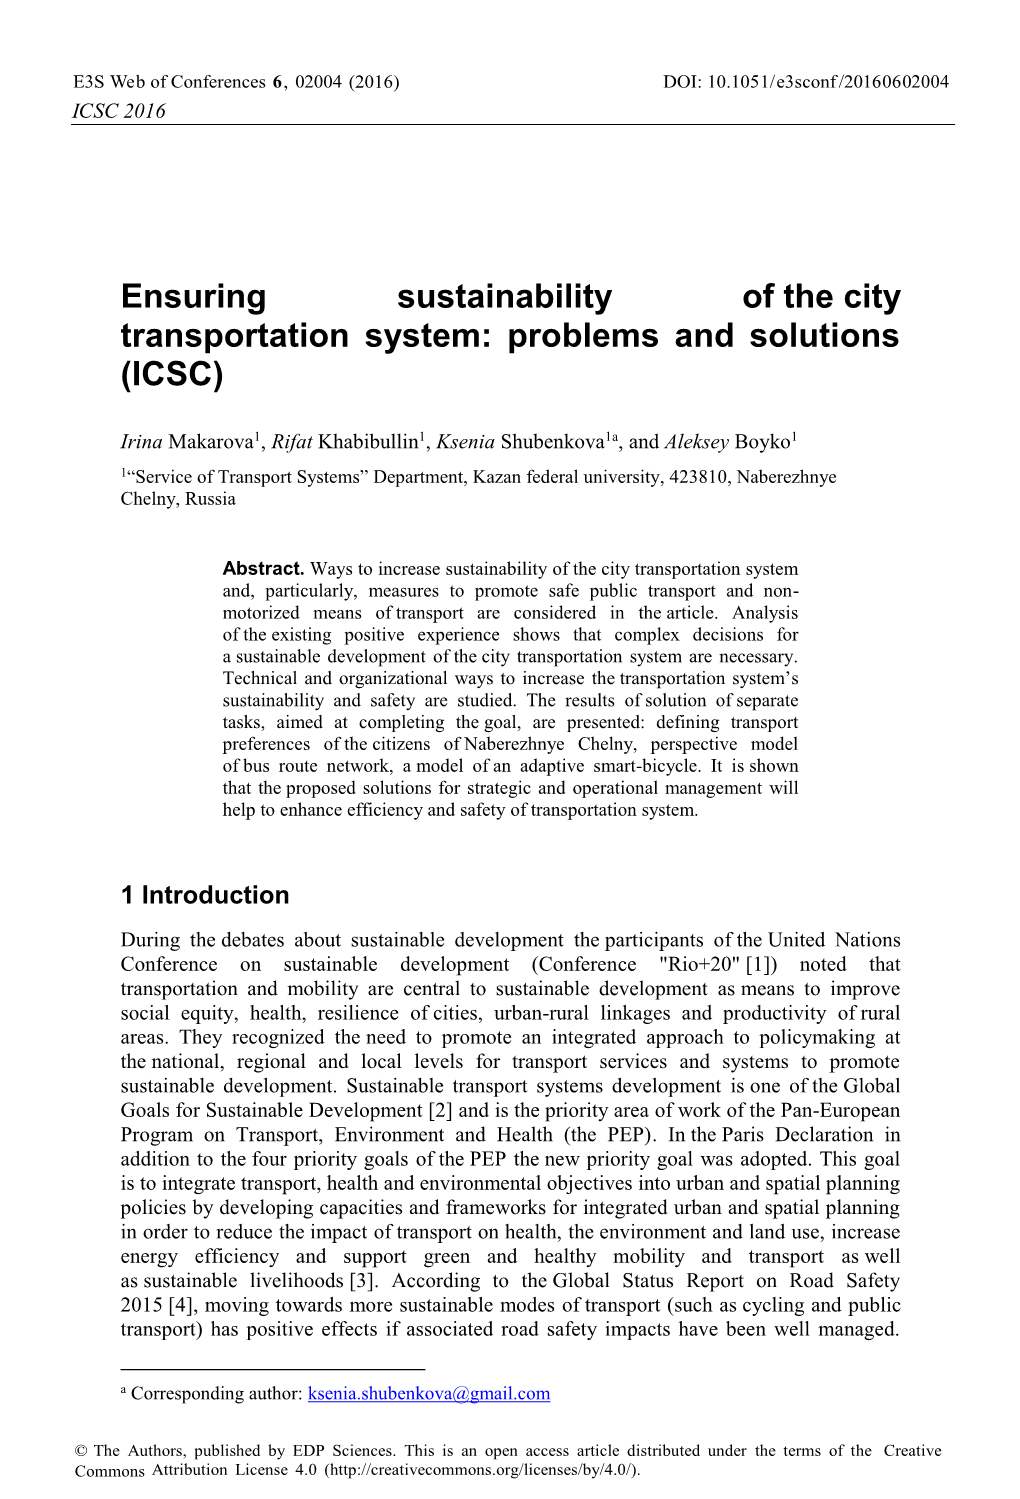 Ensuring Sustainability of the City Transportation System: Problems and Solutions (ICSC)